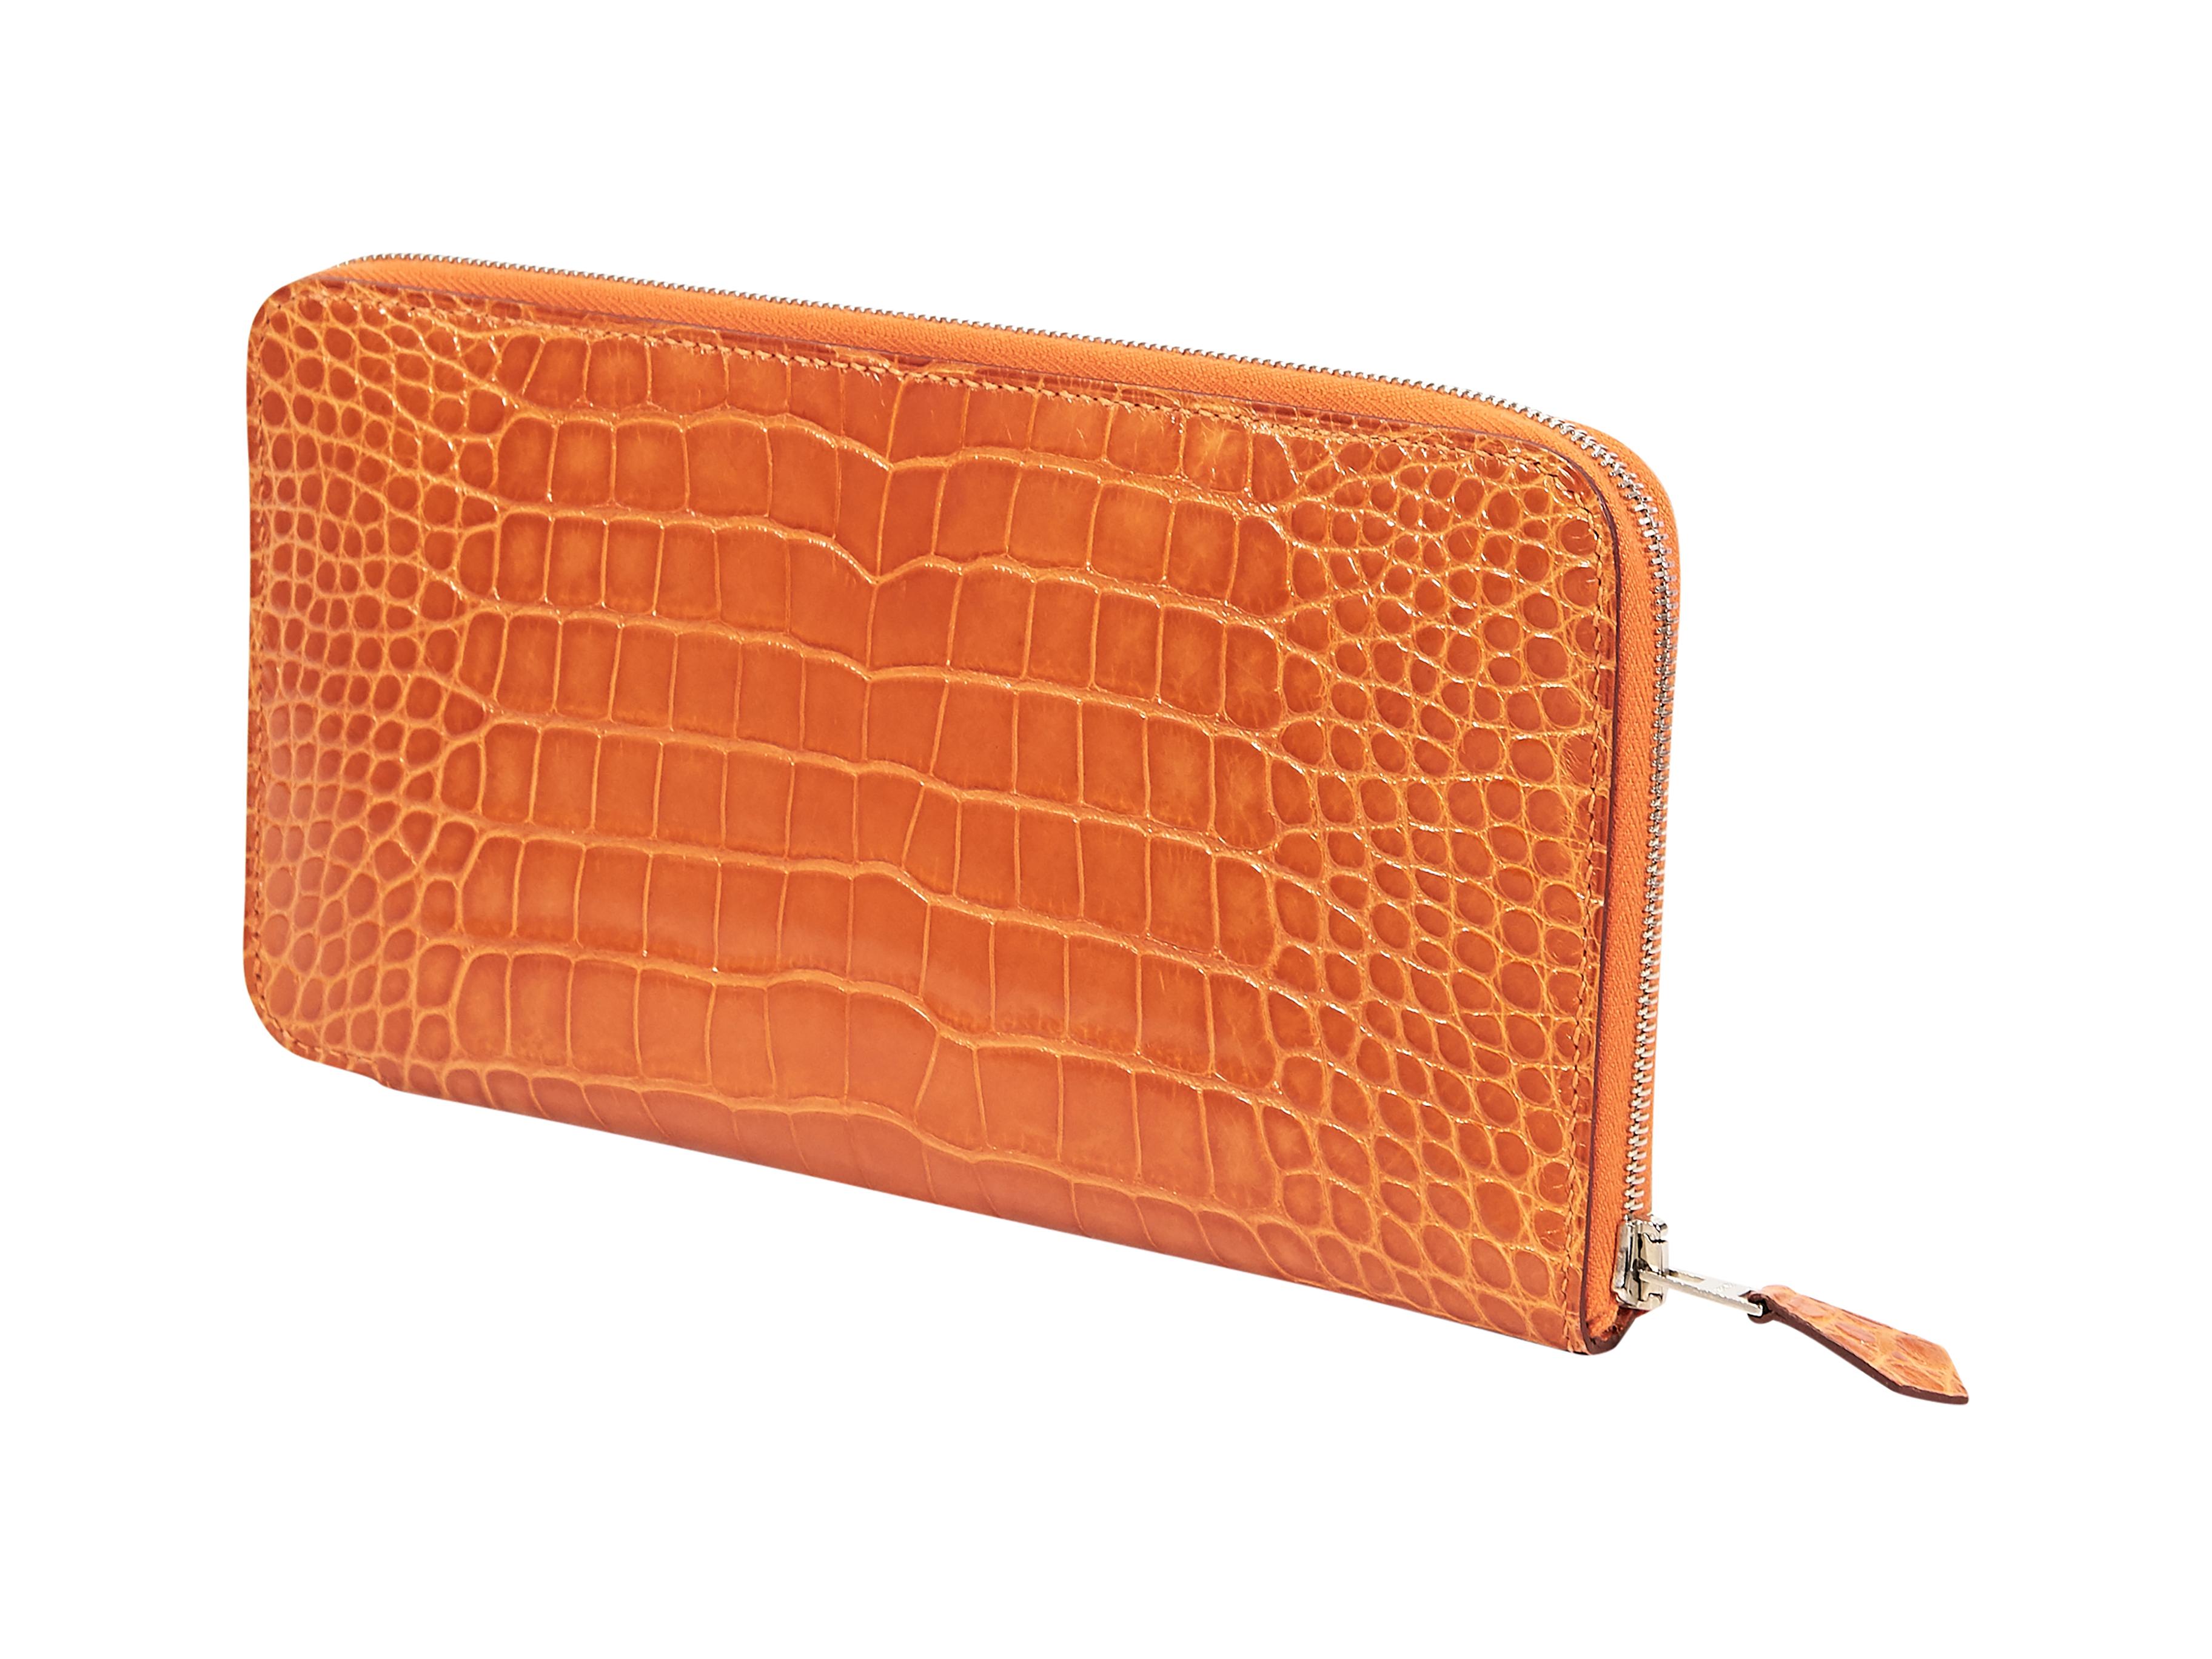 Product details:  Orange alligator wallet by Hermes.  Zip-around closure.  Leather interior with multiple inner credit card slots and center zip coin pouch.  Silvertone hardware.  Dust bag included.  7.75